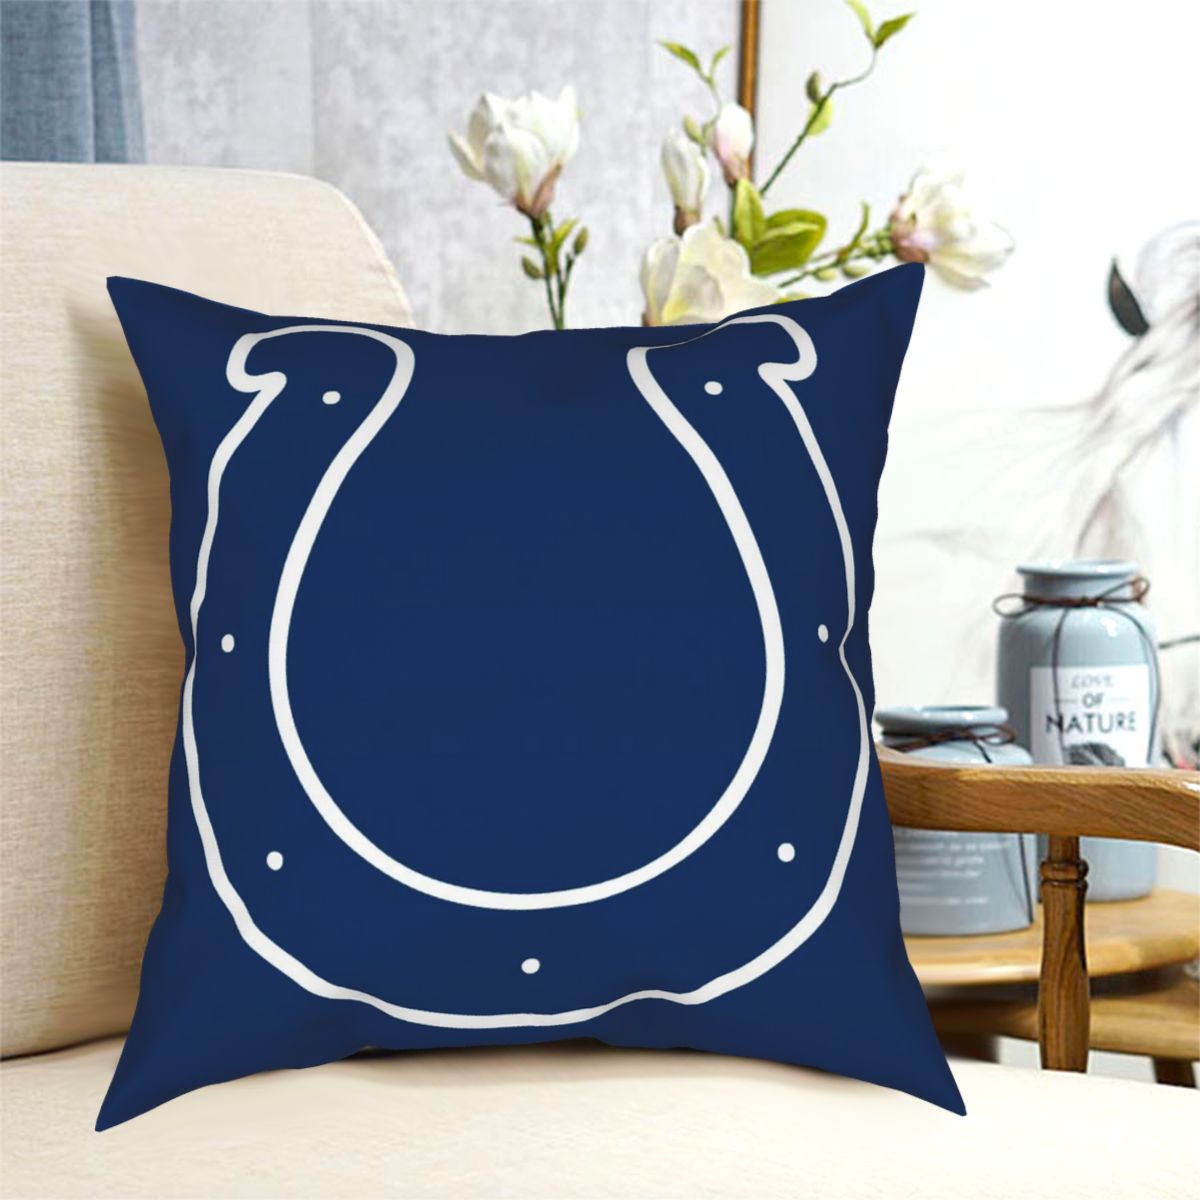 Custom Decorative Football Pillow Case Indianapolis Colts Blue Pillowcase Personalized Throw Pillow Covers